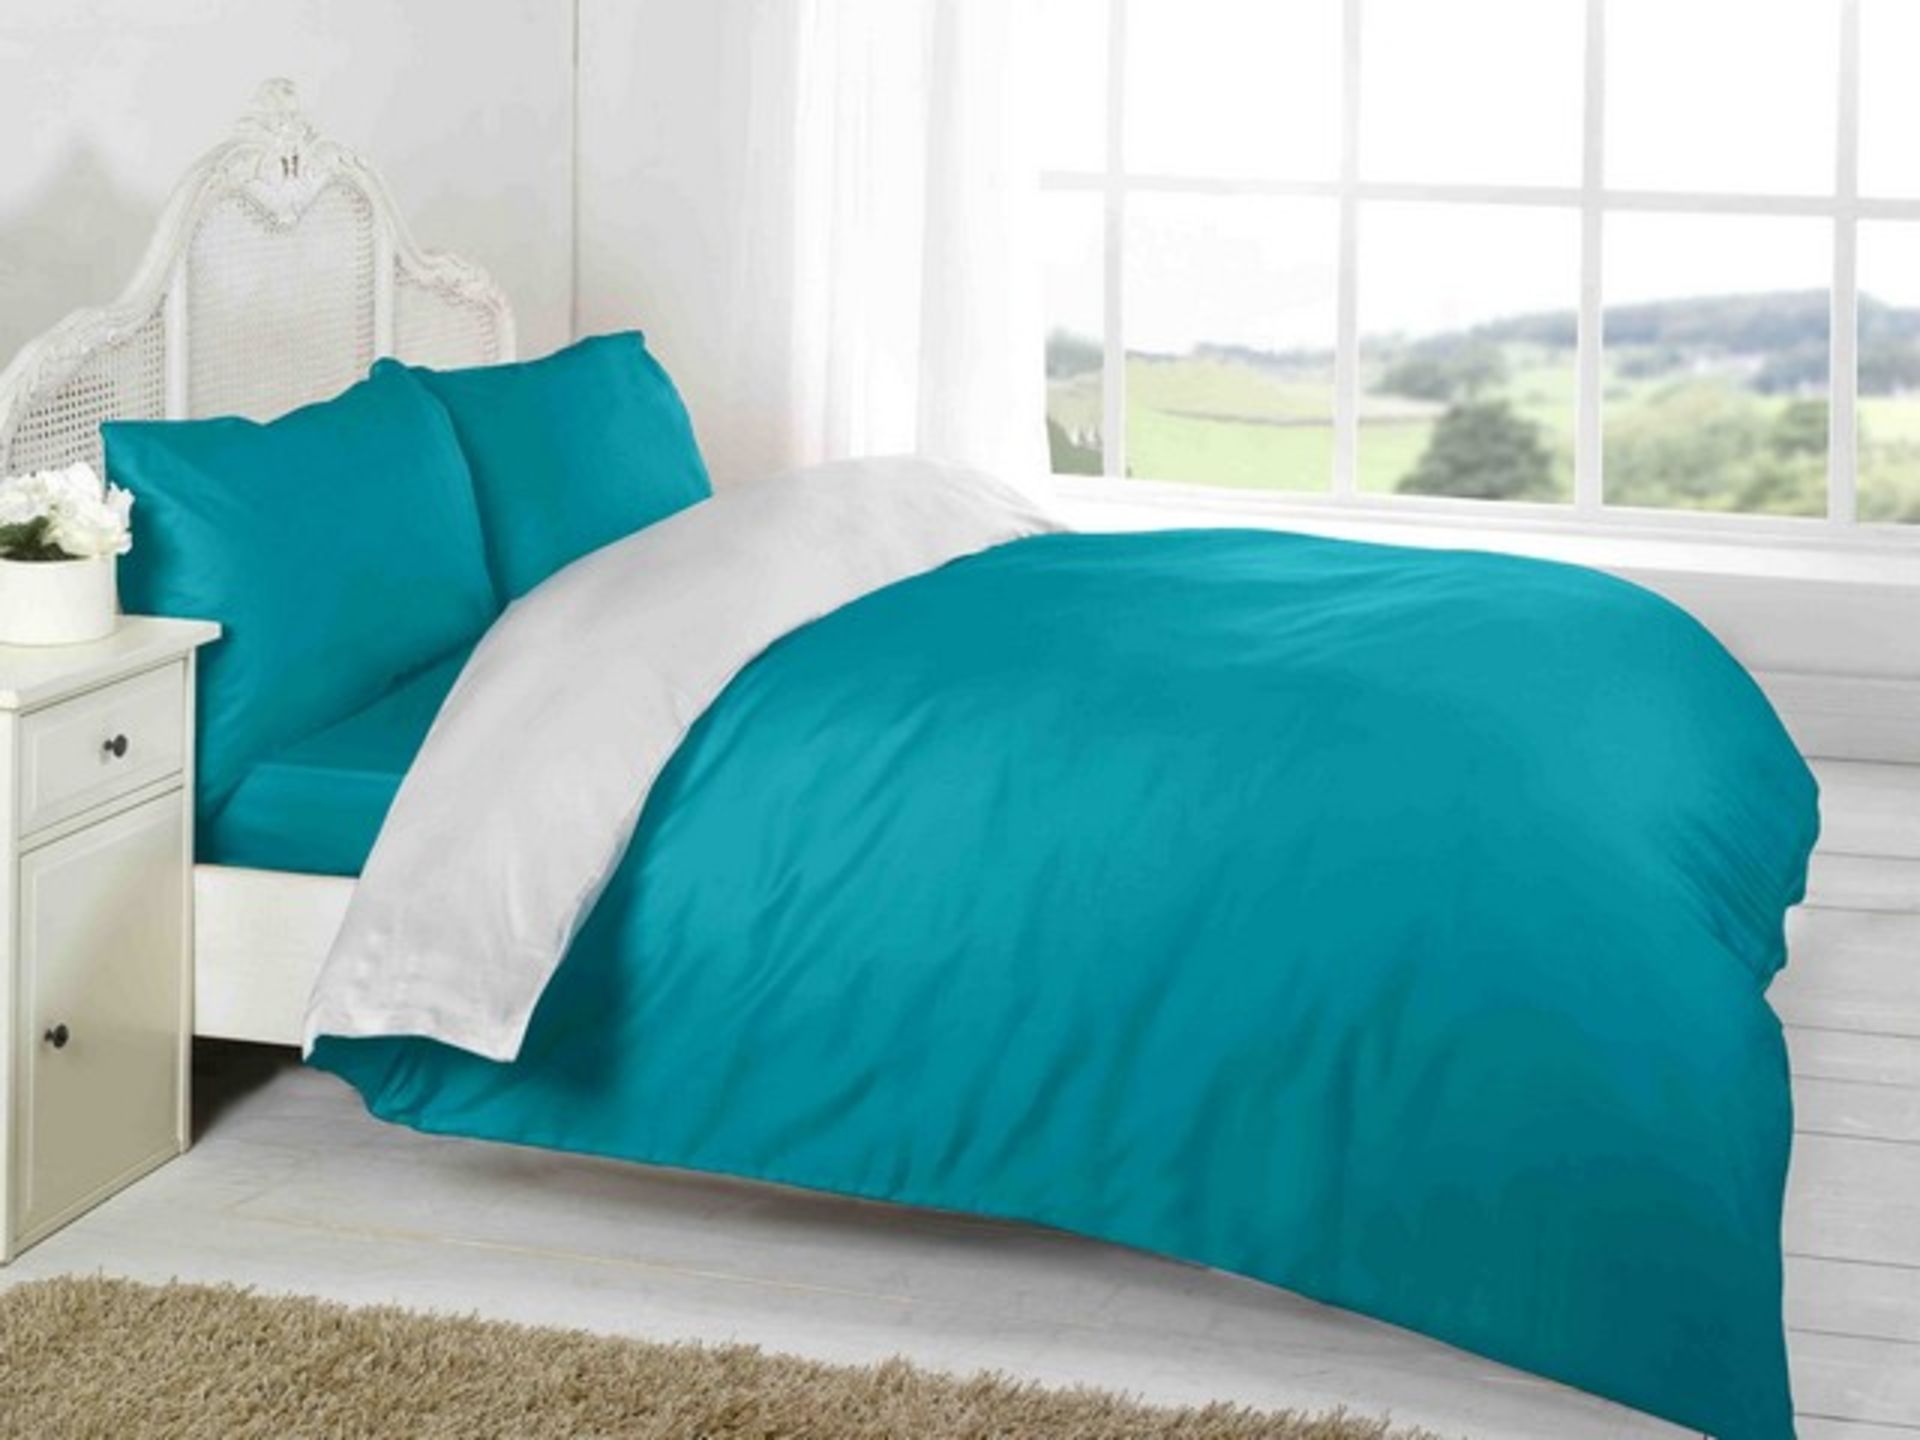 V Brand New Double Complete Teal/White Reversible Bed Set Includes 1 x Duvet Cover - 1 x Fitted